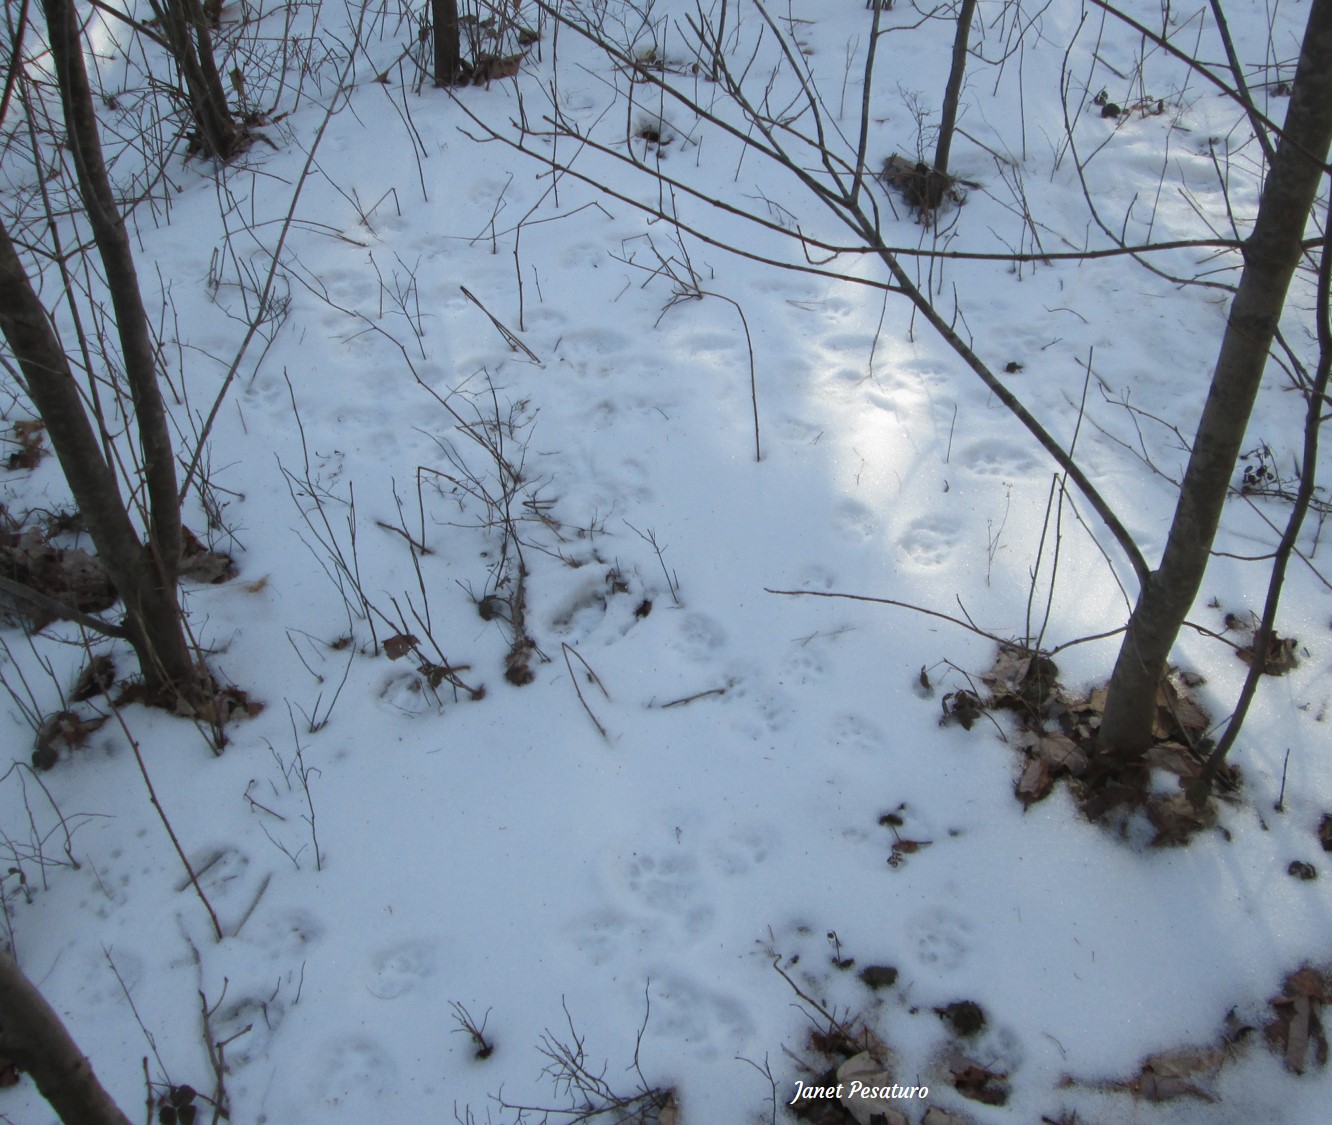 A mess of bobcat tracks, probably from a mating pair